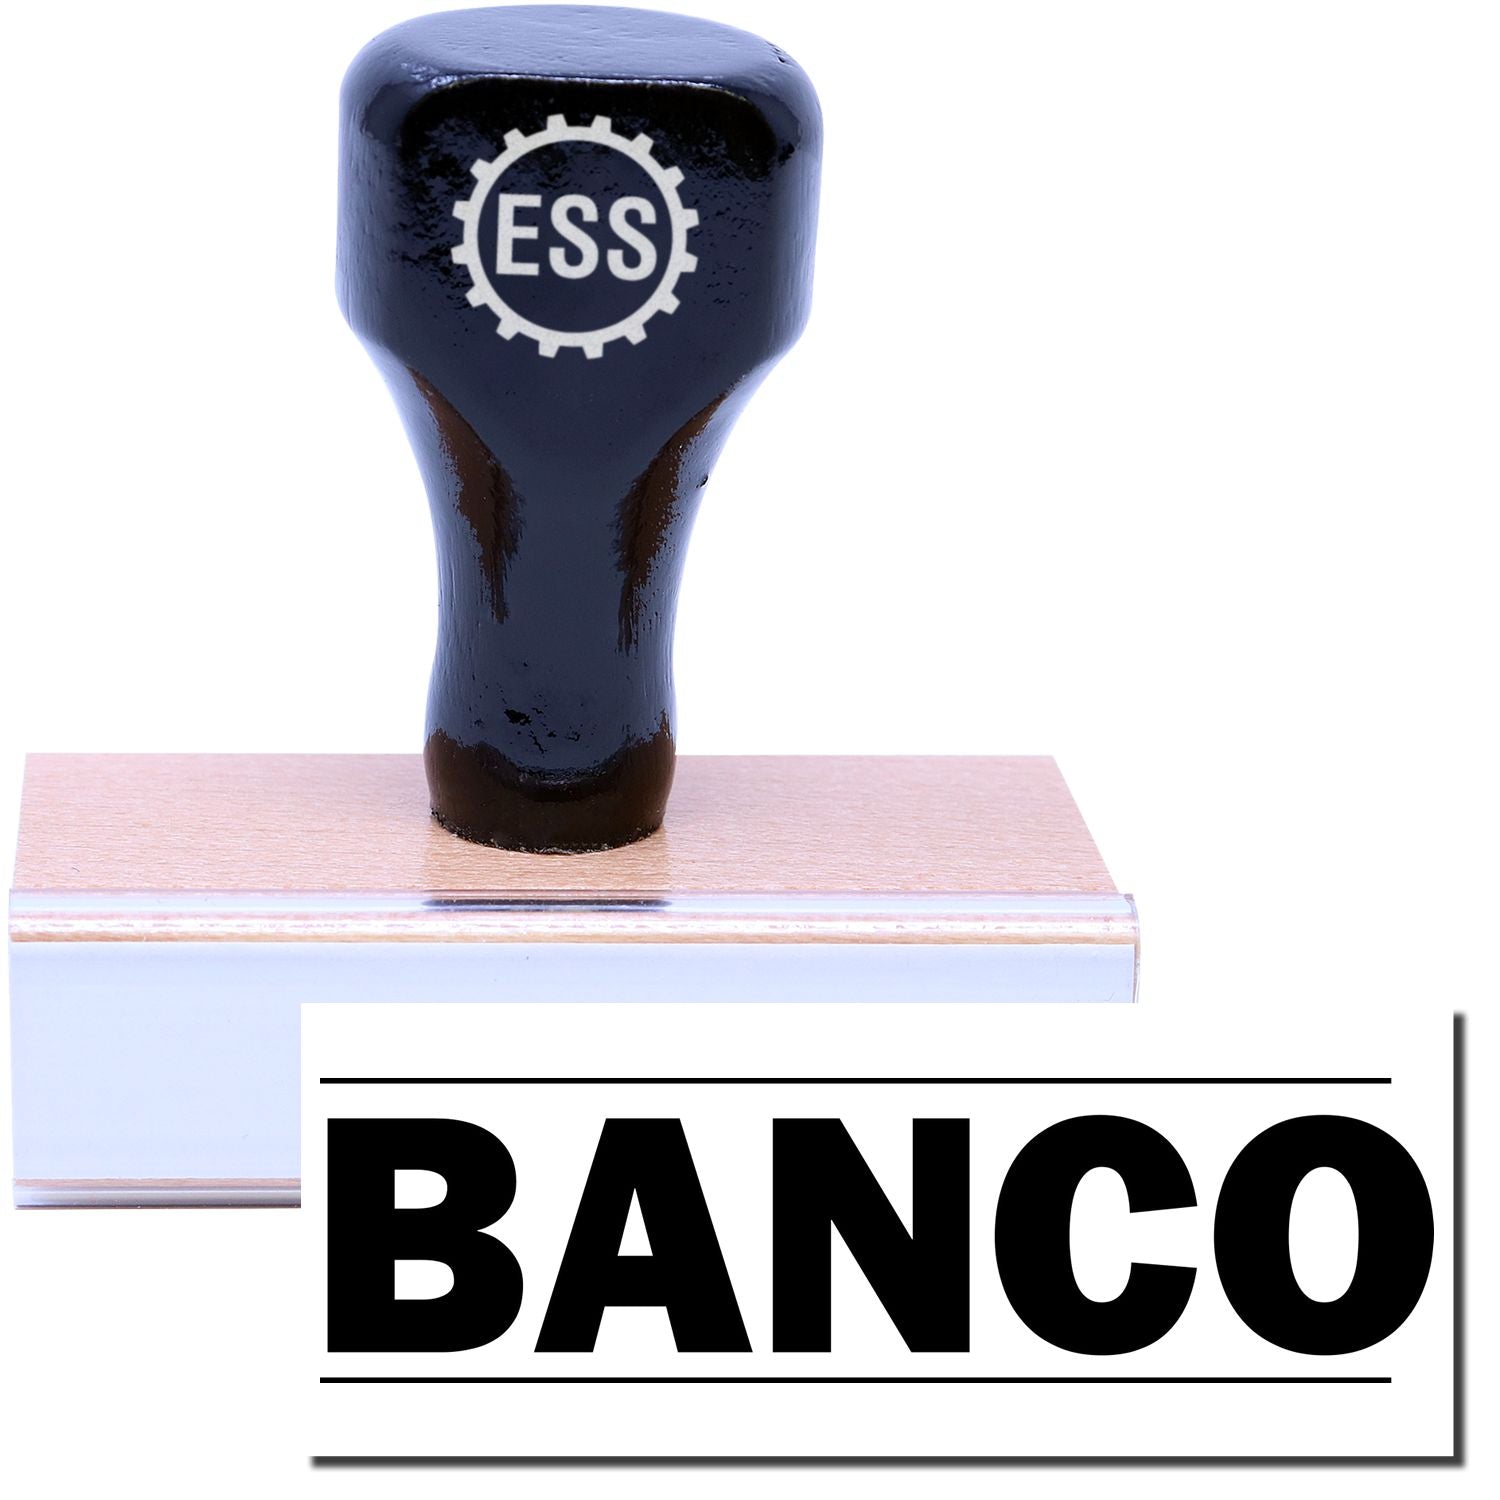 A stock office rubber stamp with a stamped image showing how the text "BANCO" in bold font with a line both above and below the text is displayed after stamping.